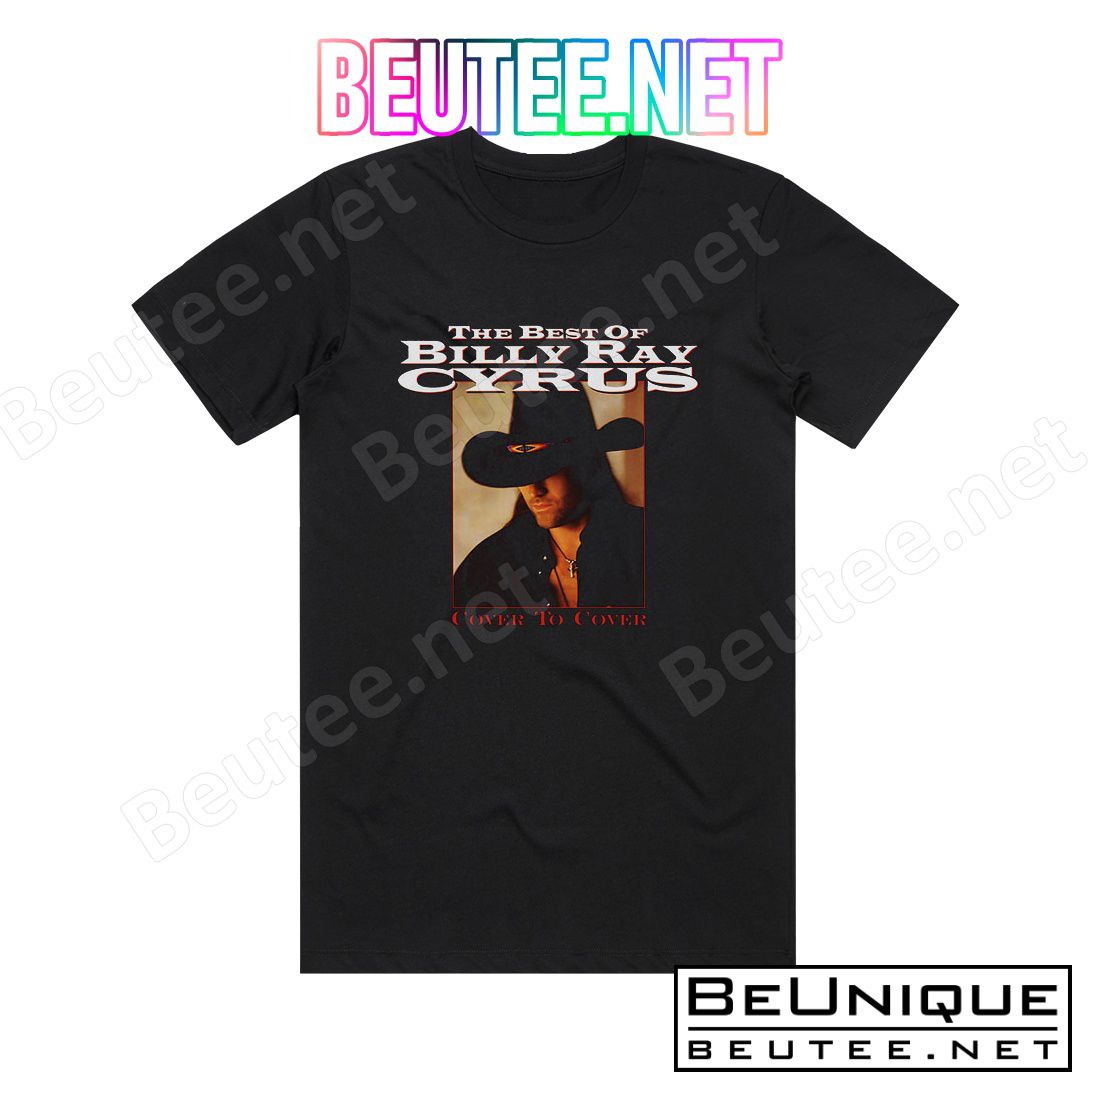 Billy Ray Cyrus The Best Of Billy Ray Cyrus Cover To Cover Album Cover T-Shirt